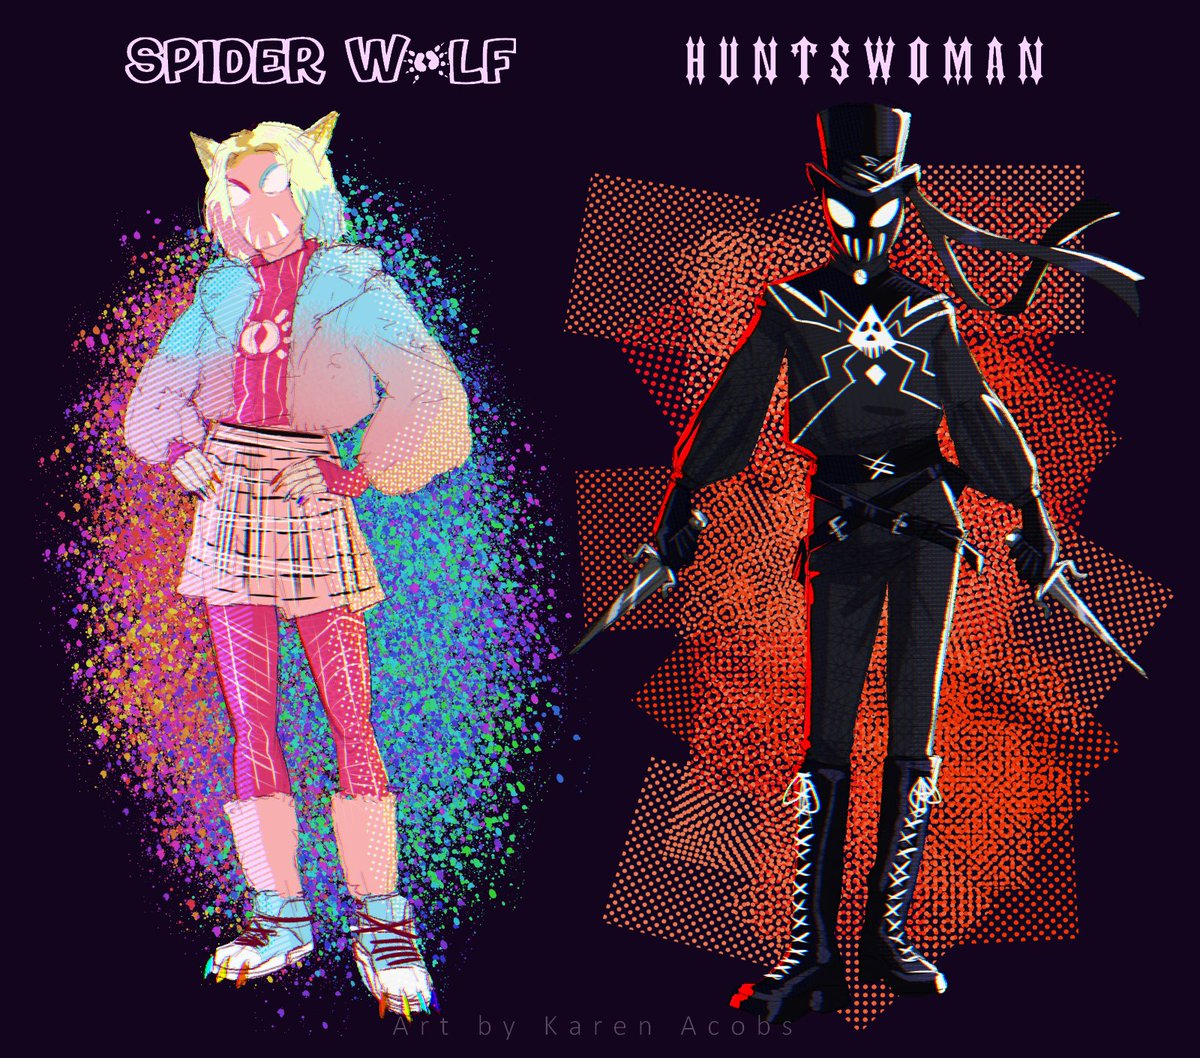 My turn at the spidersona trend! #wenclair  #Wednesday #enidsinclair  #spidersona #SpiderVerse